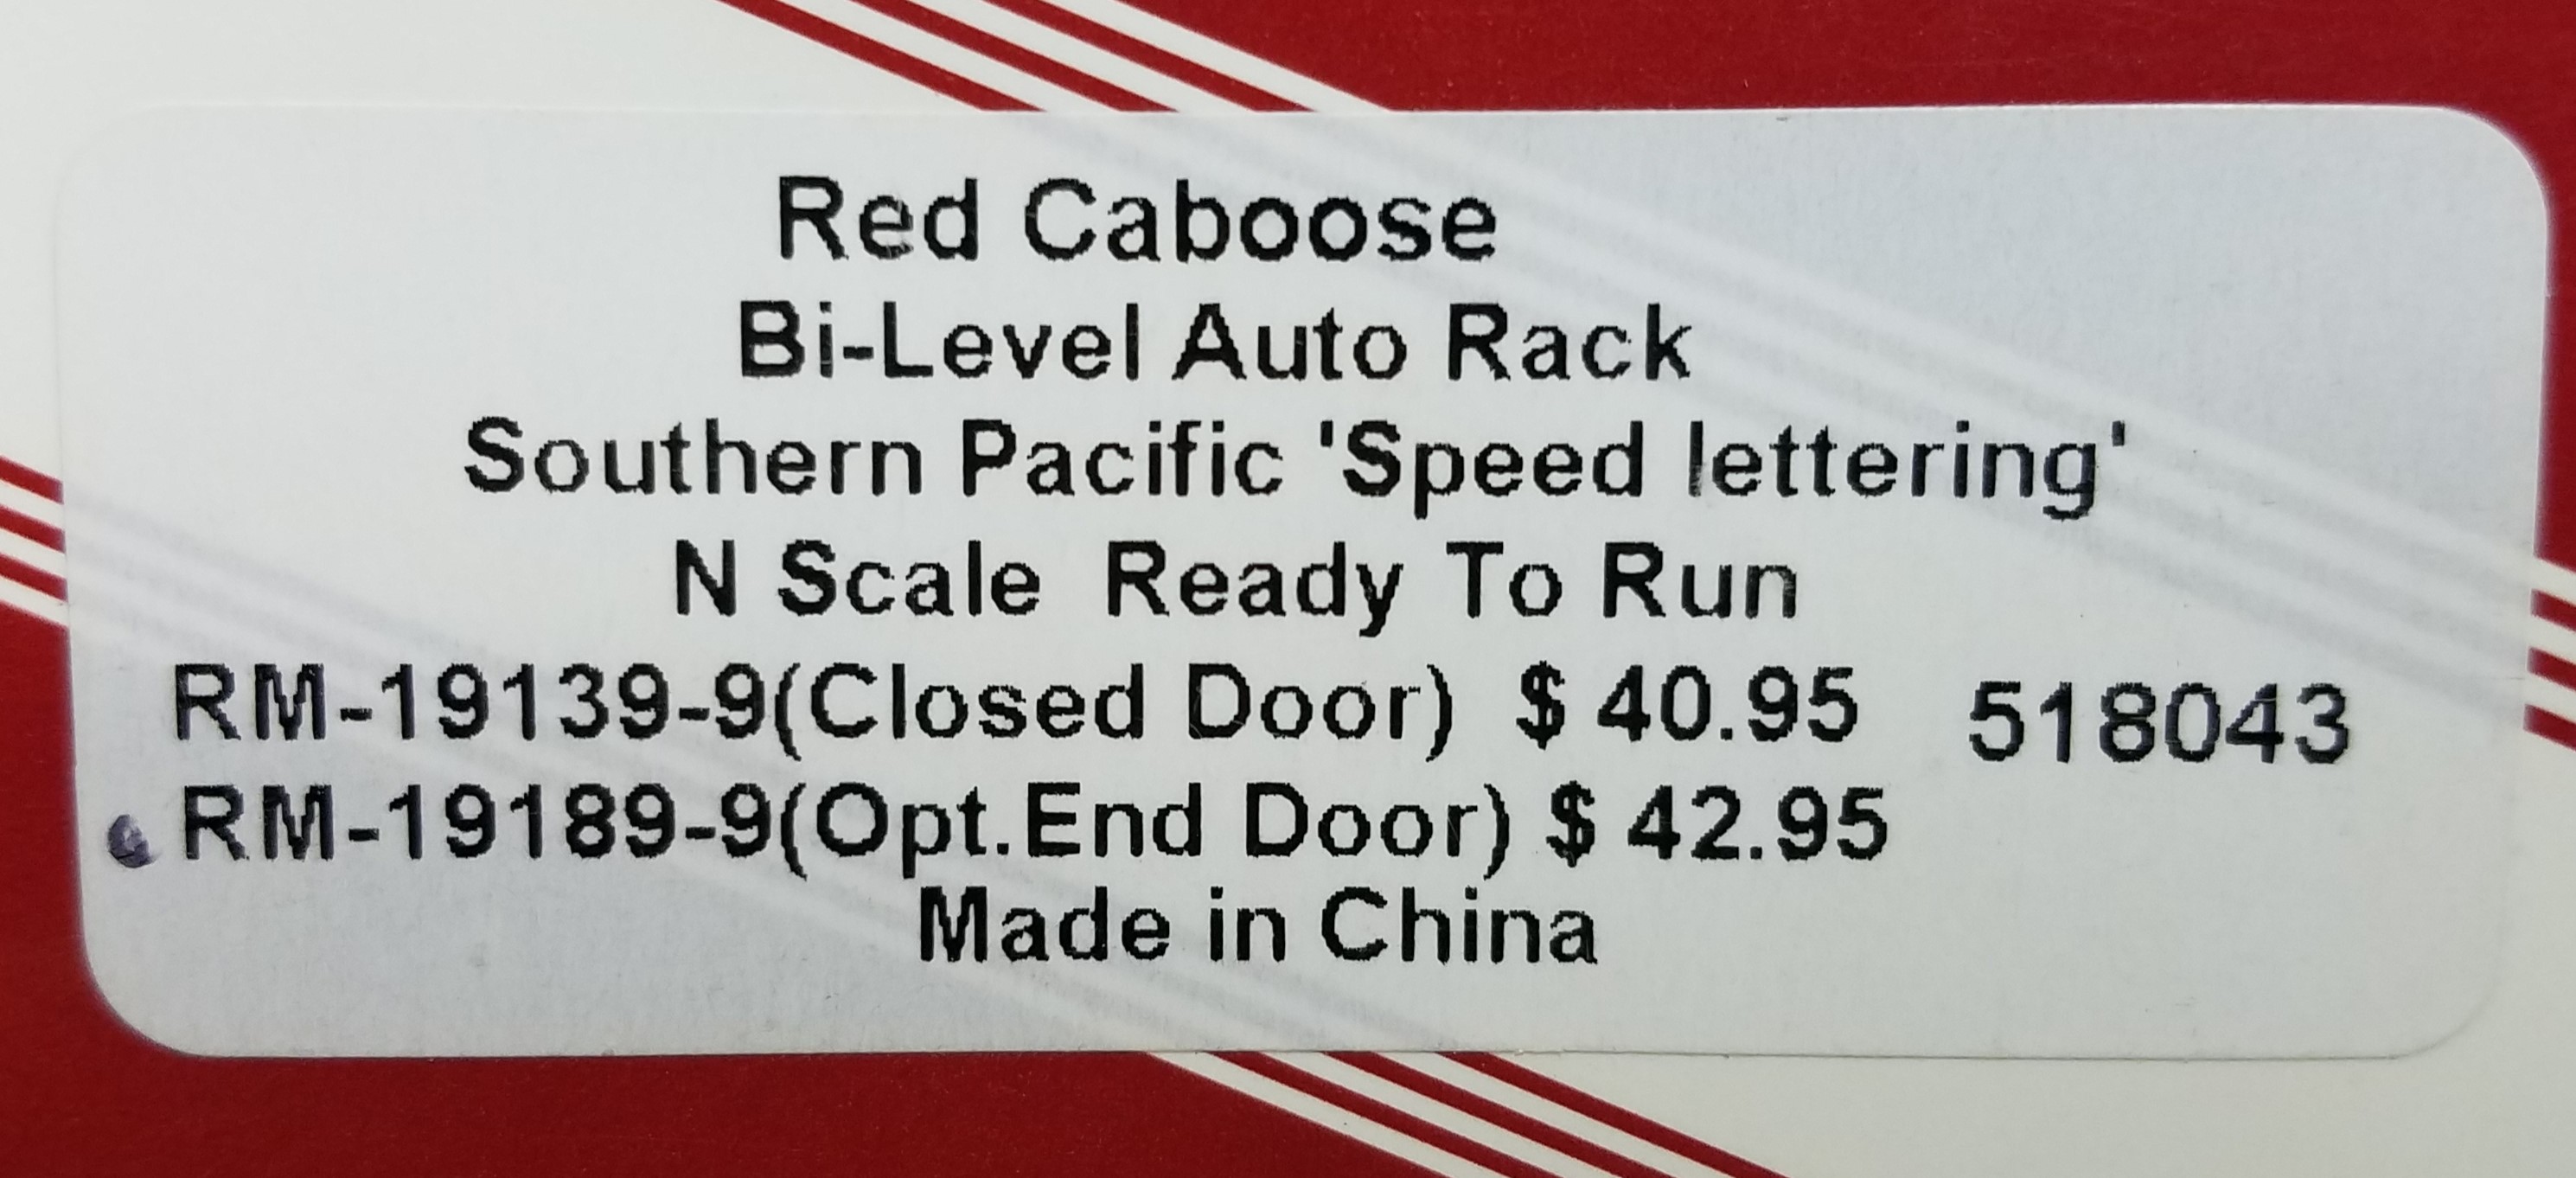 N Scale - Red Caboose - RM-19189-9 - Autorack, Enclosed, Bi-Level - Southern Pacific - 518043